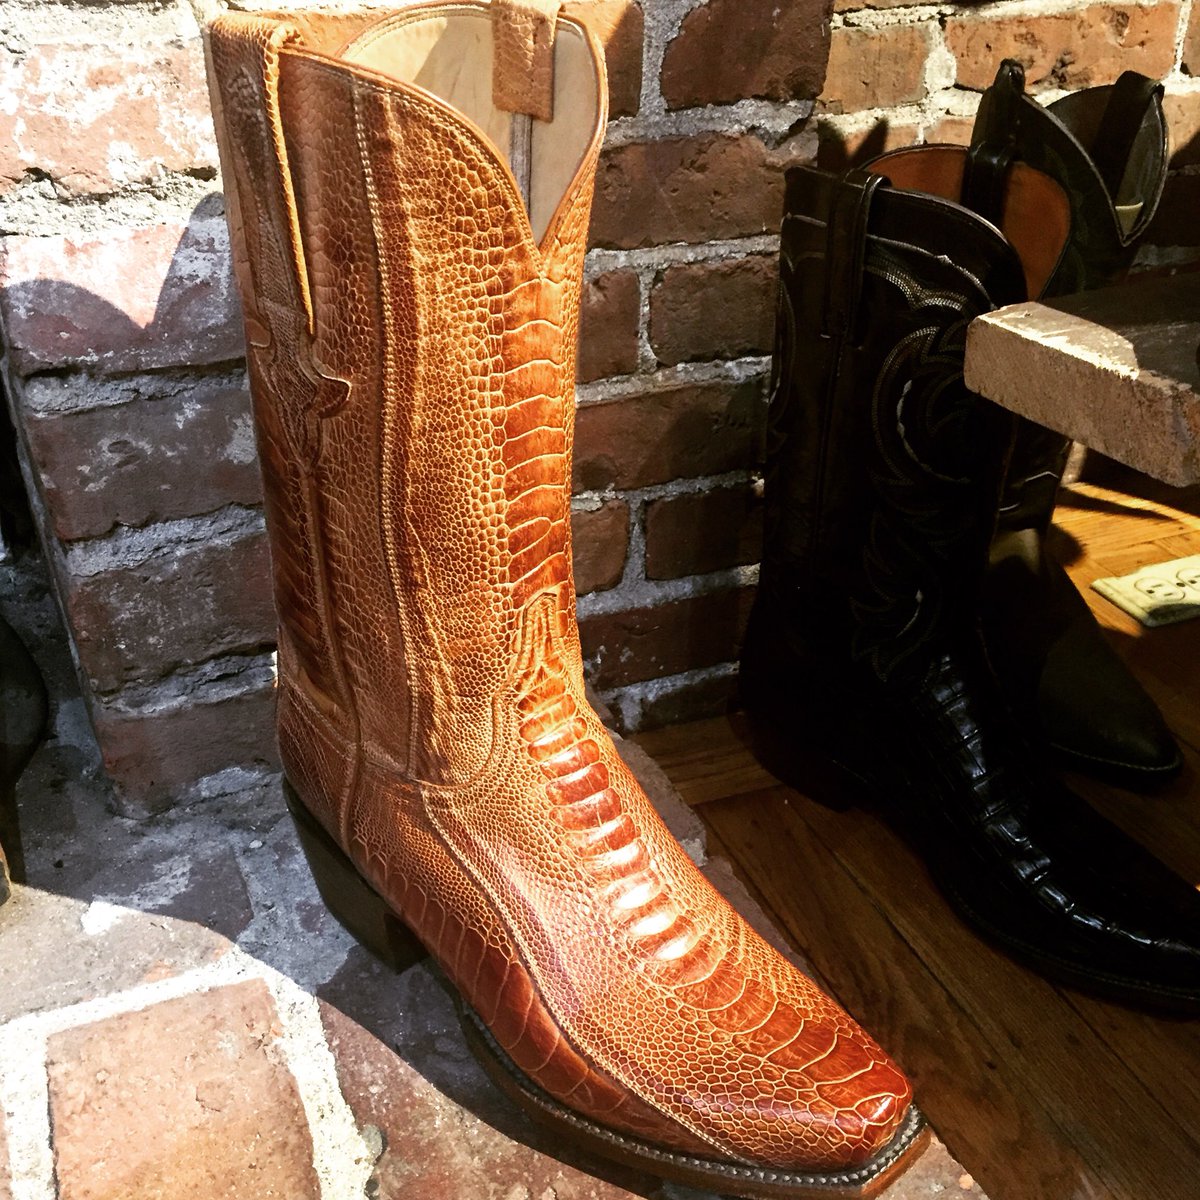 Full Ostrich Leg cowboy boots are available @helensleather ! 
.
.
.
#helensleathershop #thelookthatfeelssogood #lucchese #cowboyboots #ostrichboots #ostrichleg #exoticboots #madeinusa🇺🇸 #Boston #Leather #oldwest